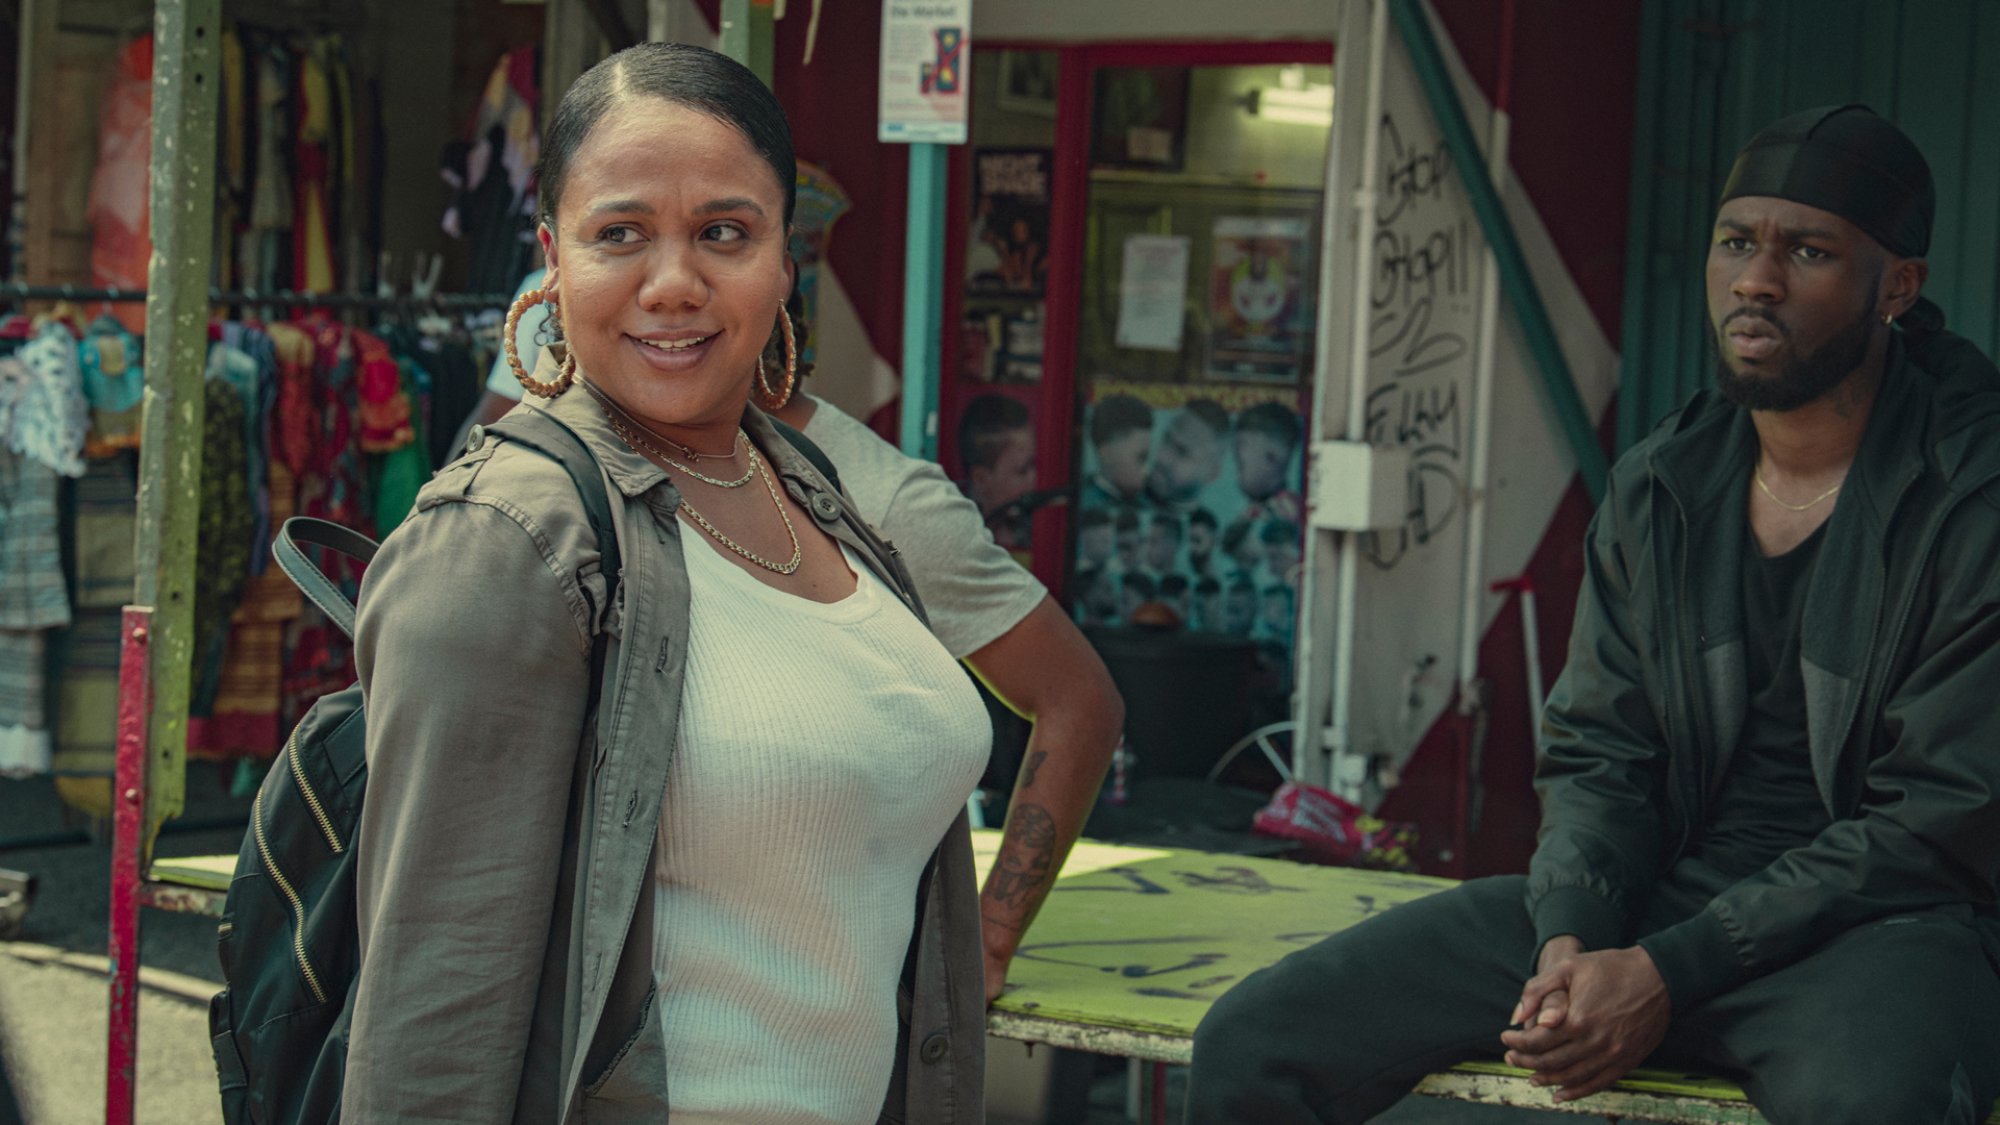 NoLay stands chatting to Joshua Blissett in a market in the show "Top Boy"